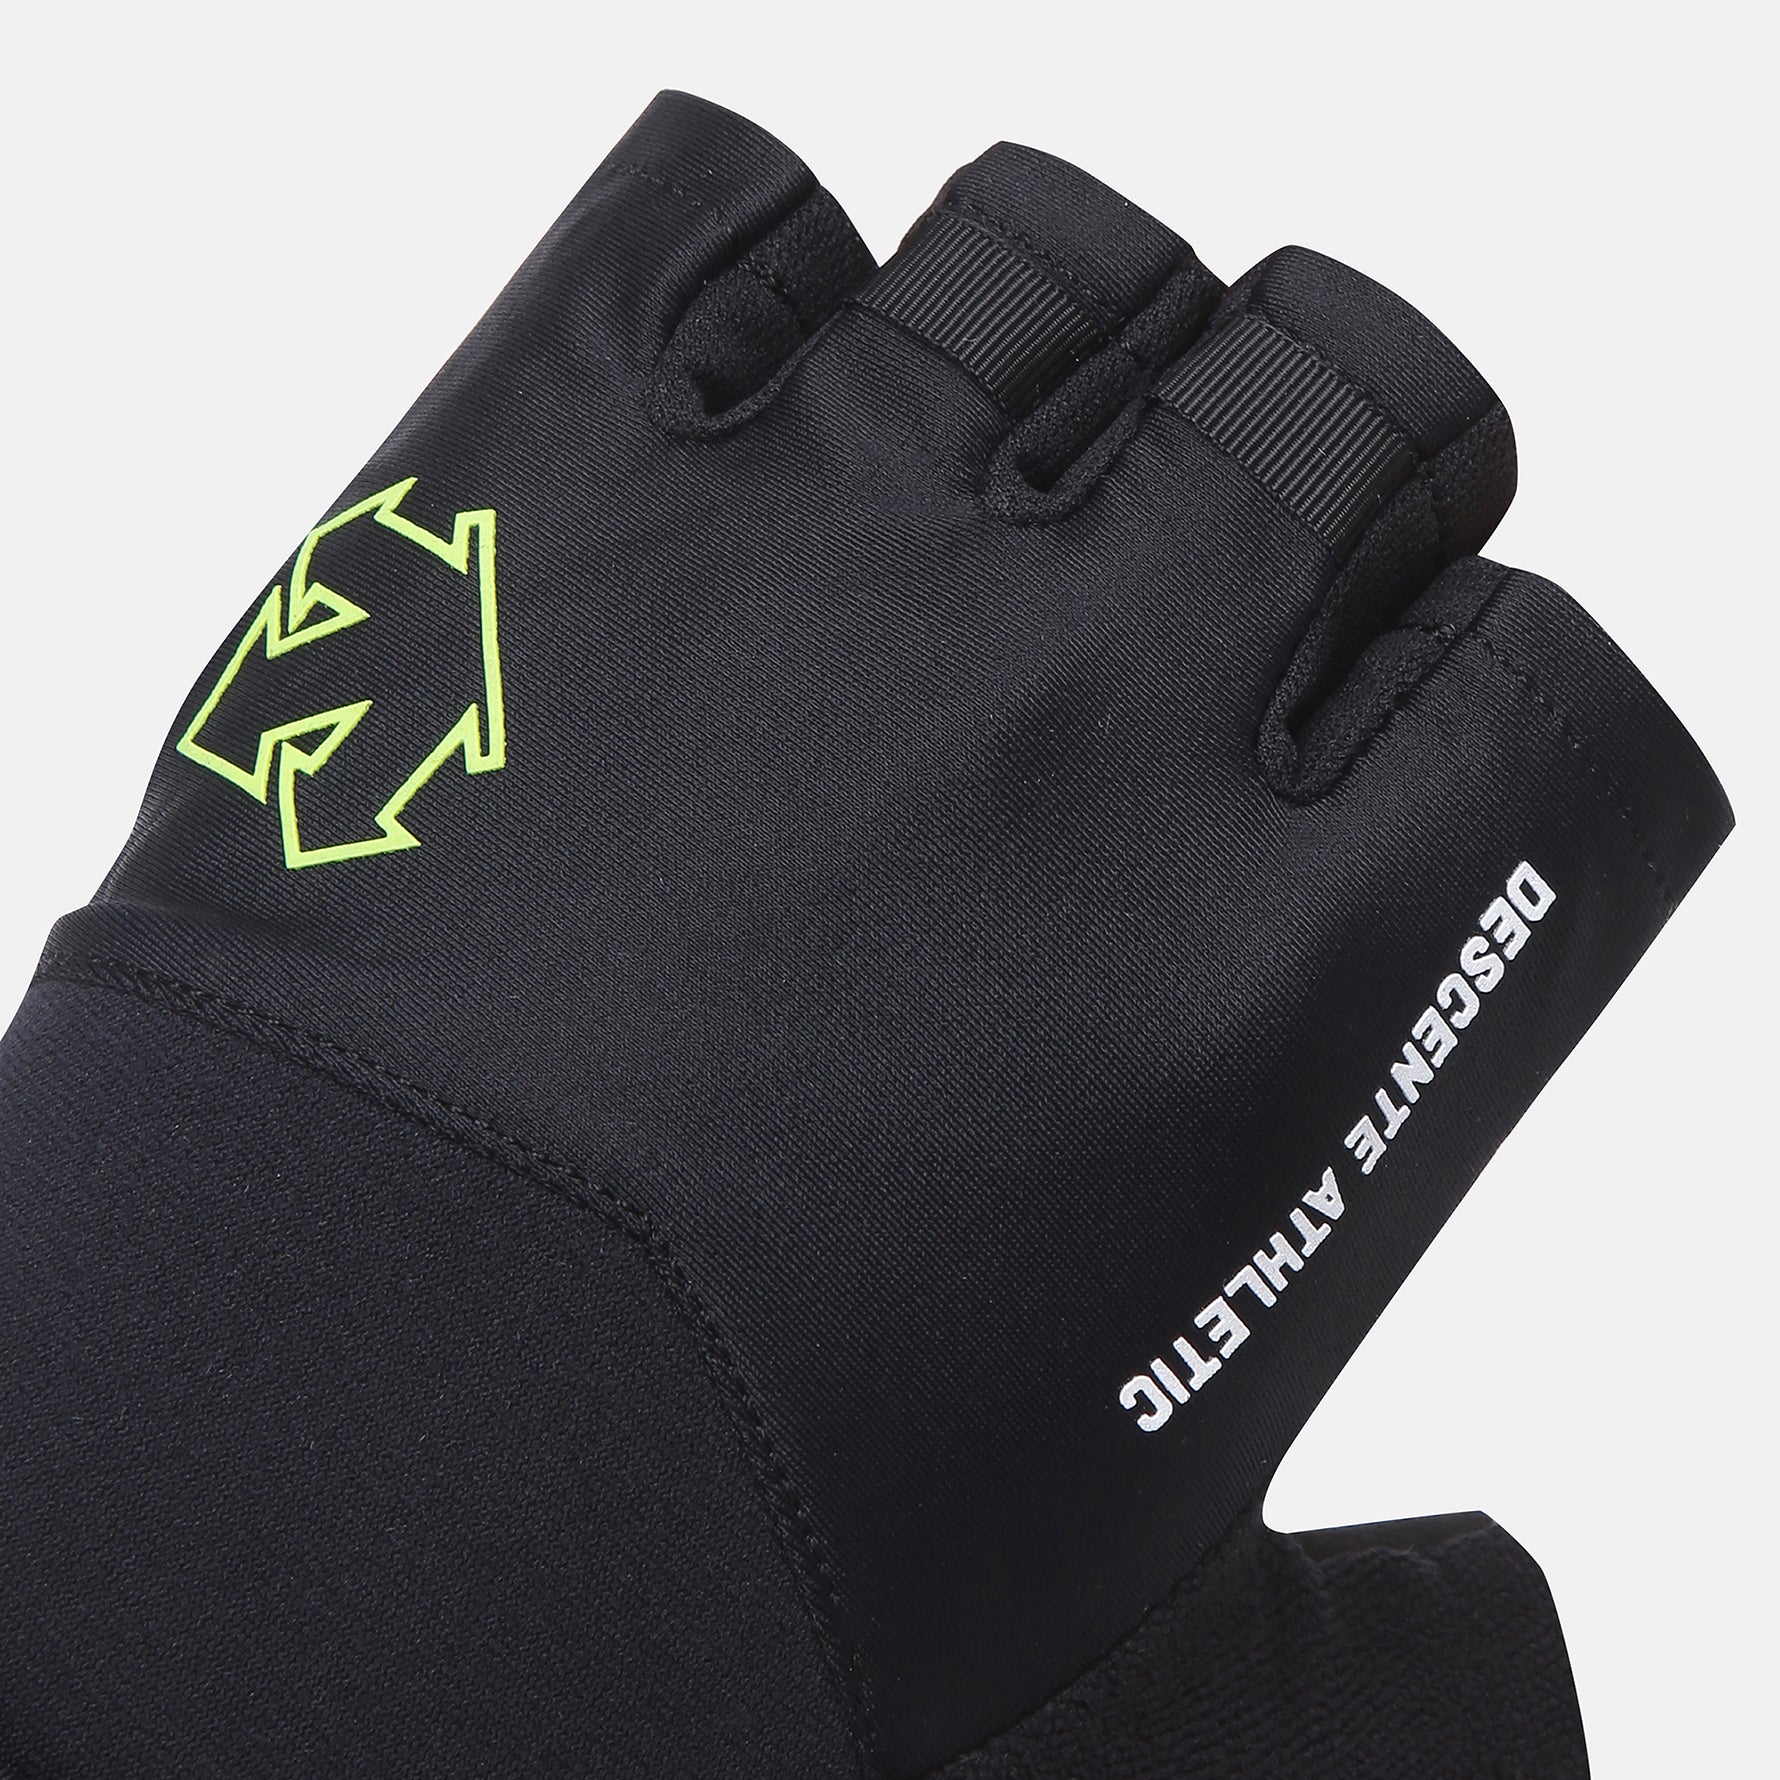 Gng Tay Th Thao Unisex Training Band Half Glove Gng Tay Th Thao